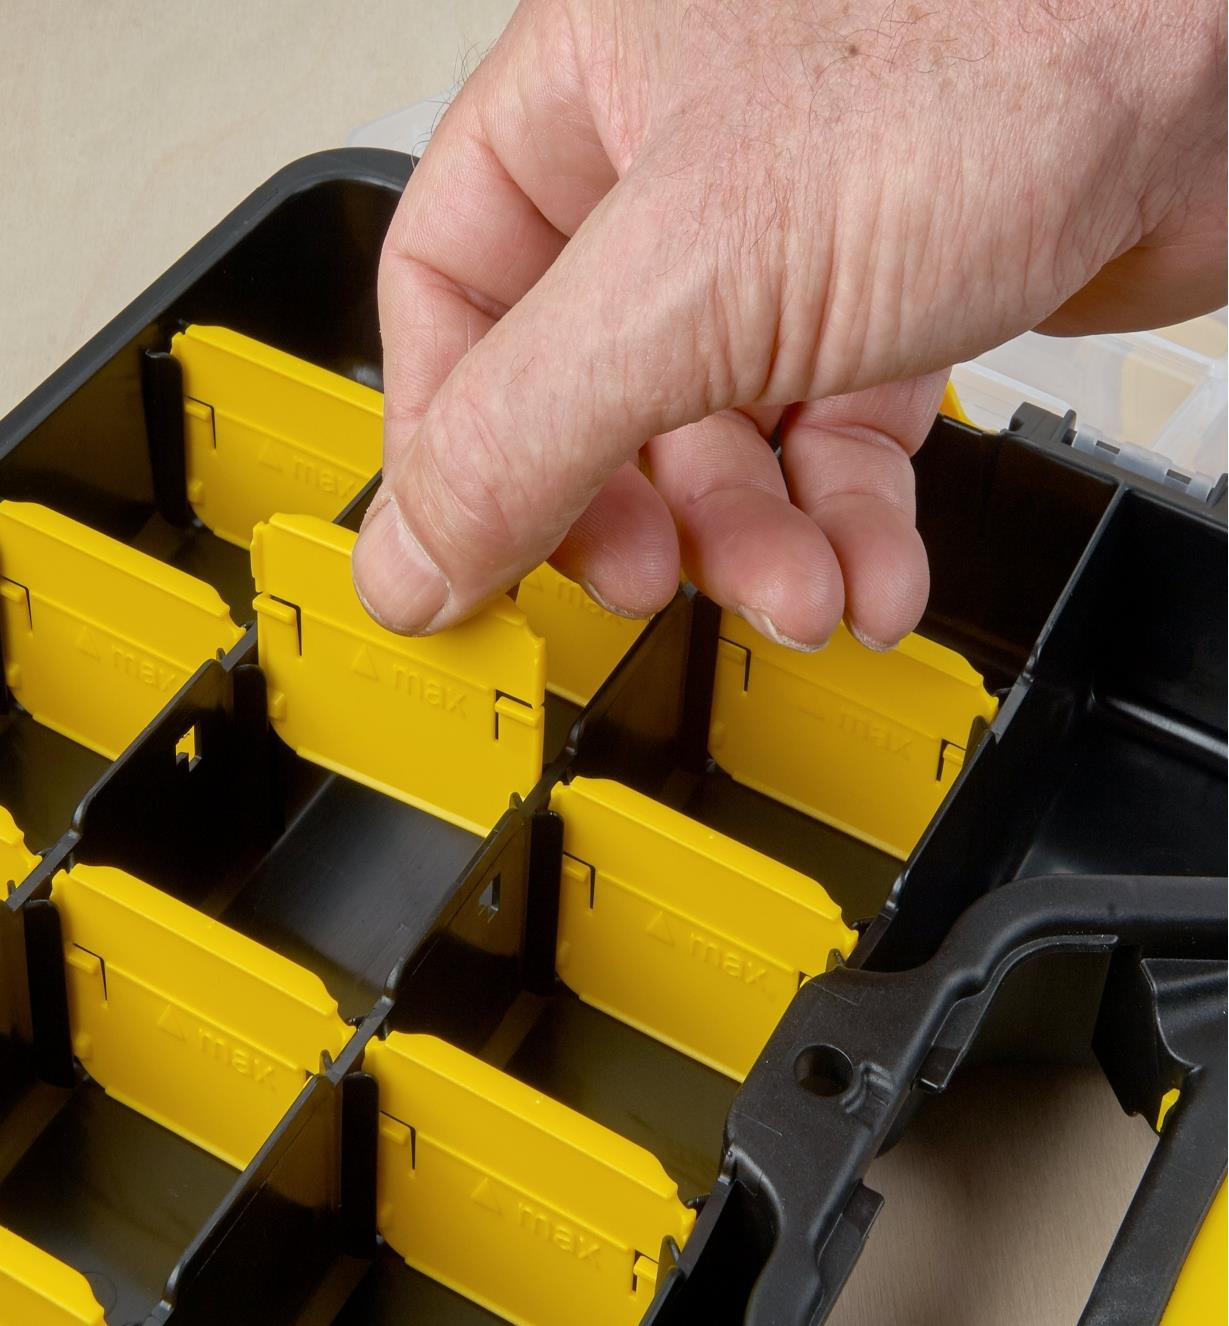 A person inserts a removable divider used to configure the storage spaces in a 9" × 11" clip case